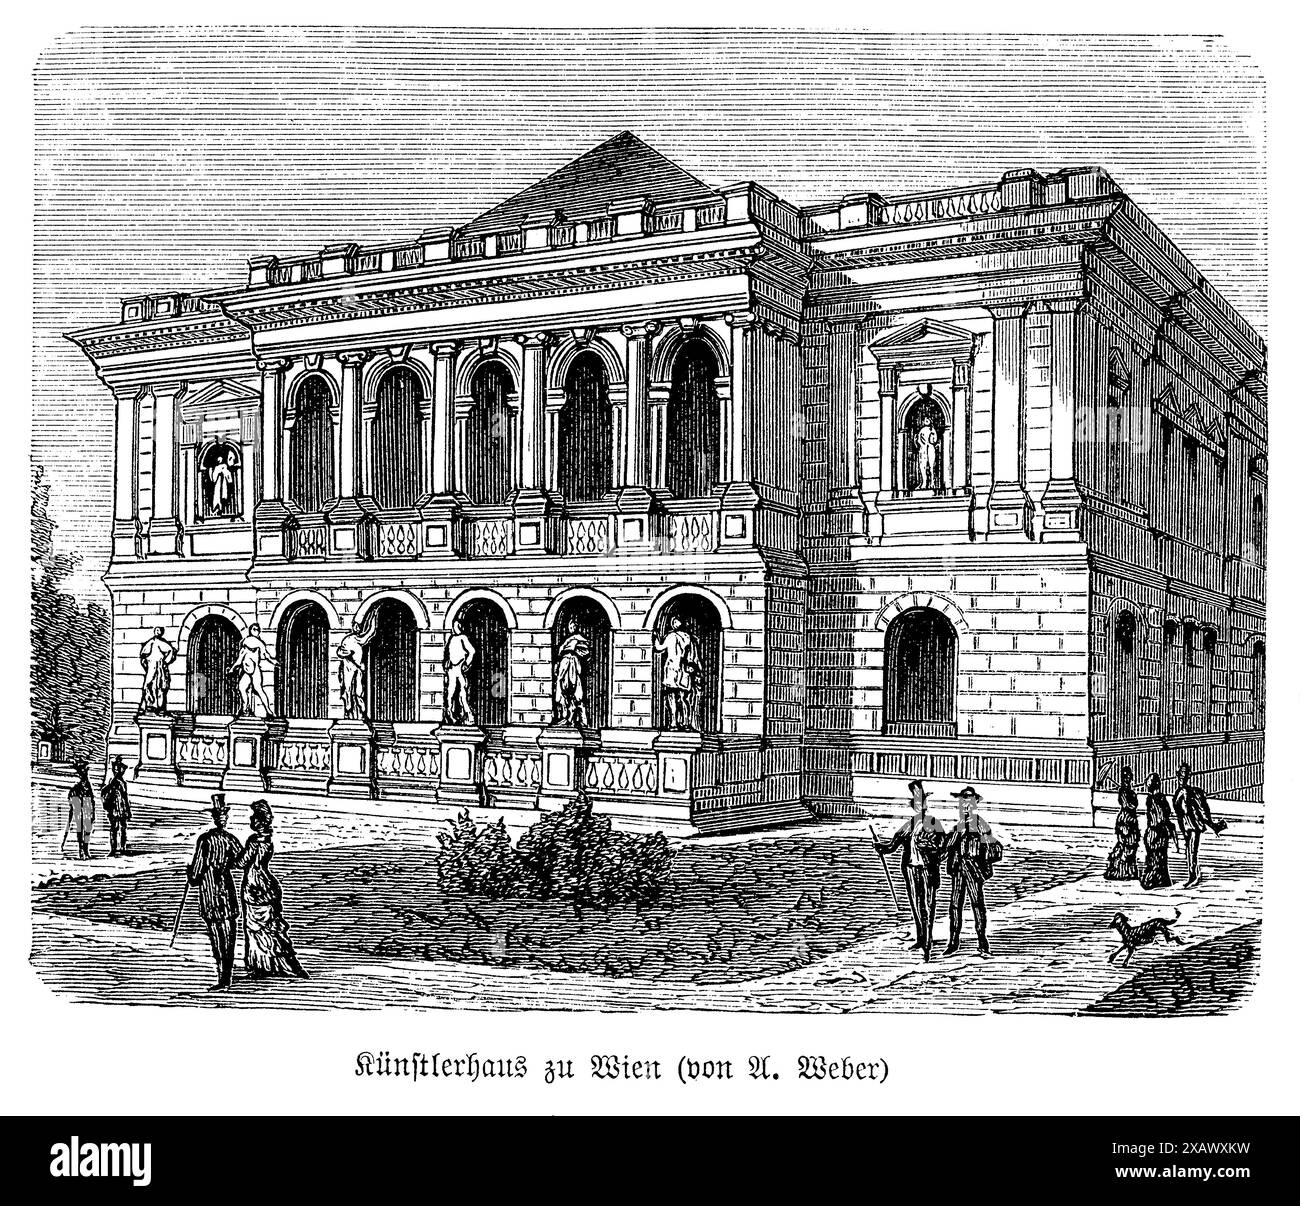 The 'Vienna Kuenstlerhaus' engraving exquisitely portrays the architectural beauty and cultural significance of this historic building, originally designed as an artists' collective. The artwork showcases the Renaissance Revival style with its elegant facades, intricate sculptures, and detailed ornamental elements. The engraving highlights the symmetrical design, grand entrance, and artistic decorations that reflect the Künstlerhaus's role as a pivotal center for art and exhibitions in Vienna. This depiction celebrates the building's enduring legacy in fostering artistic creativity and its imp Stock Photo